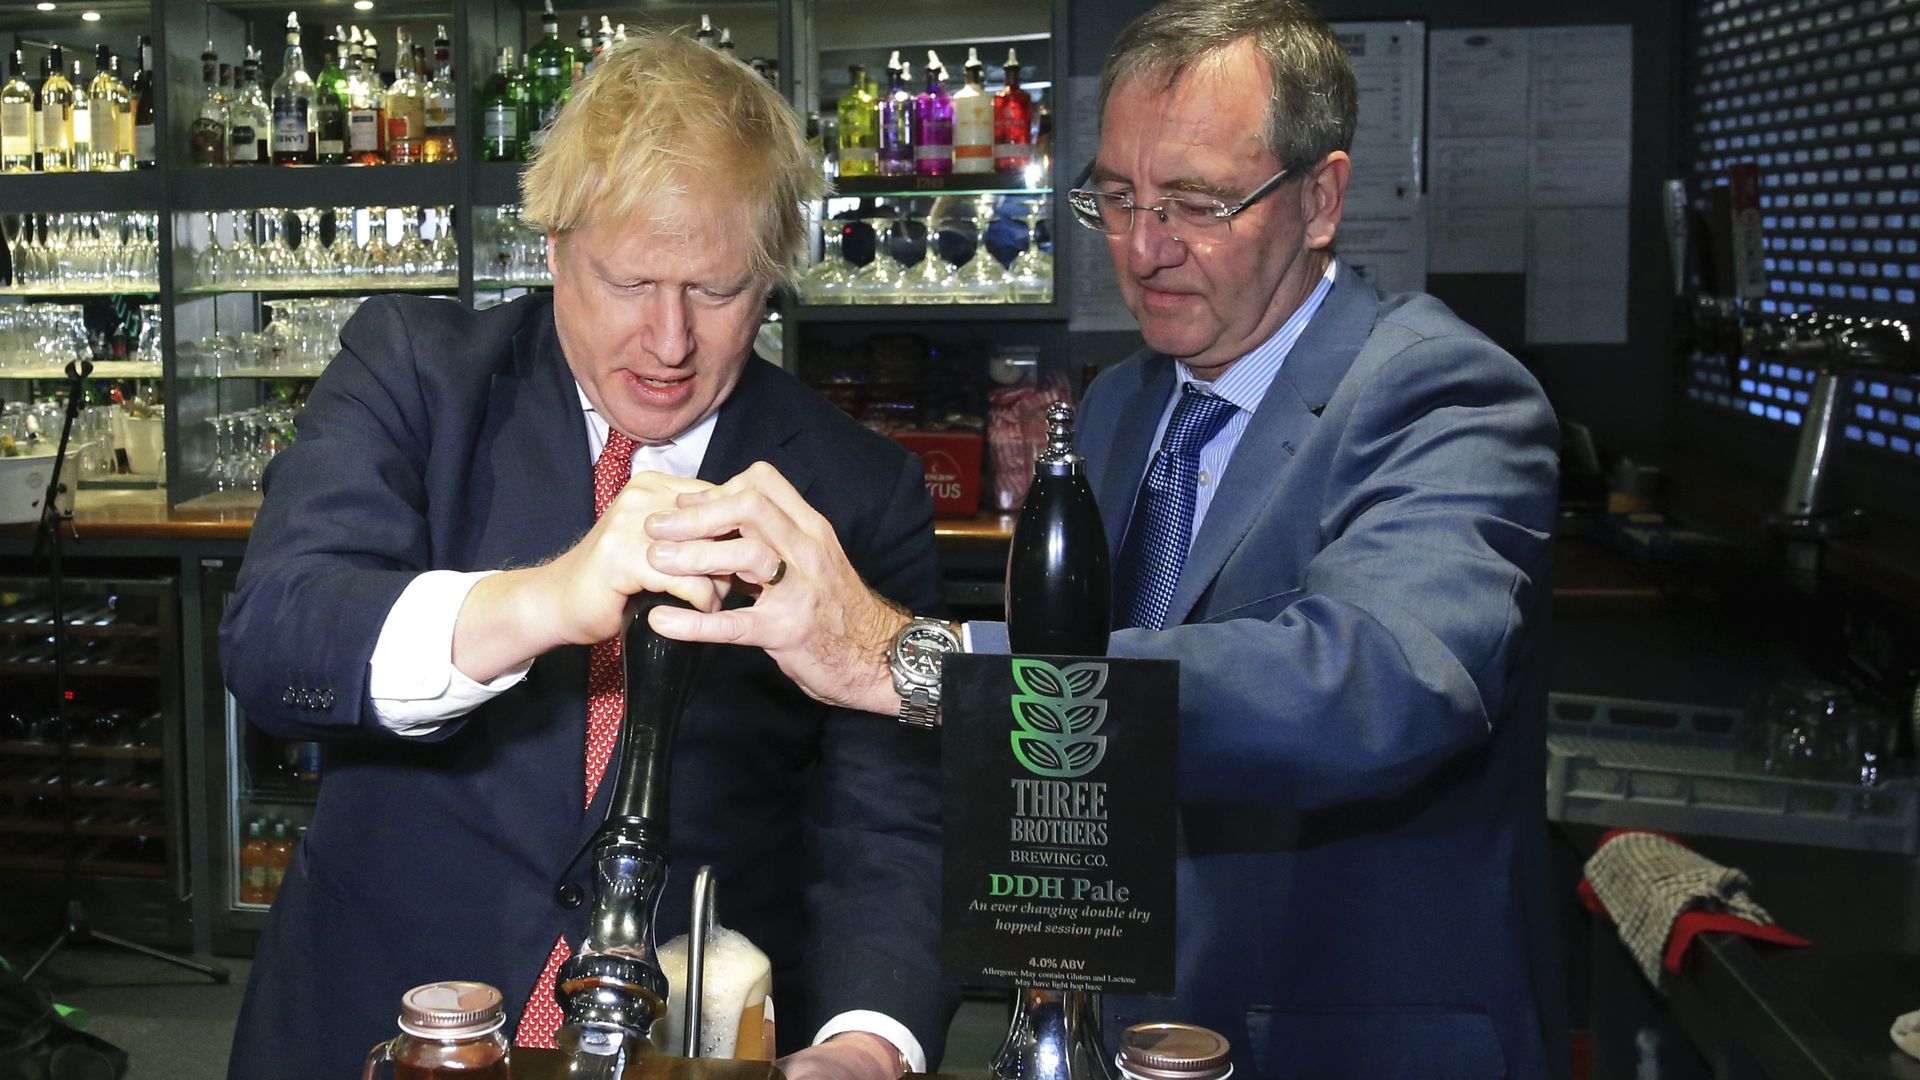 In this image, Boris Johnson stands behind the counter in a bar and pulls down a pint